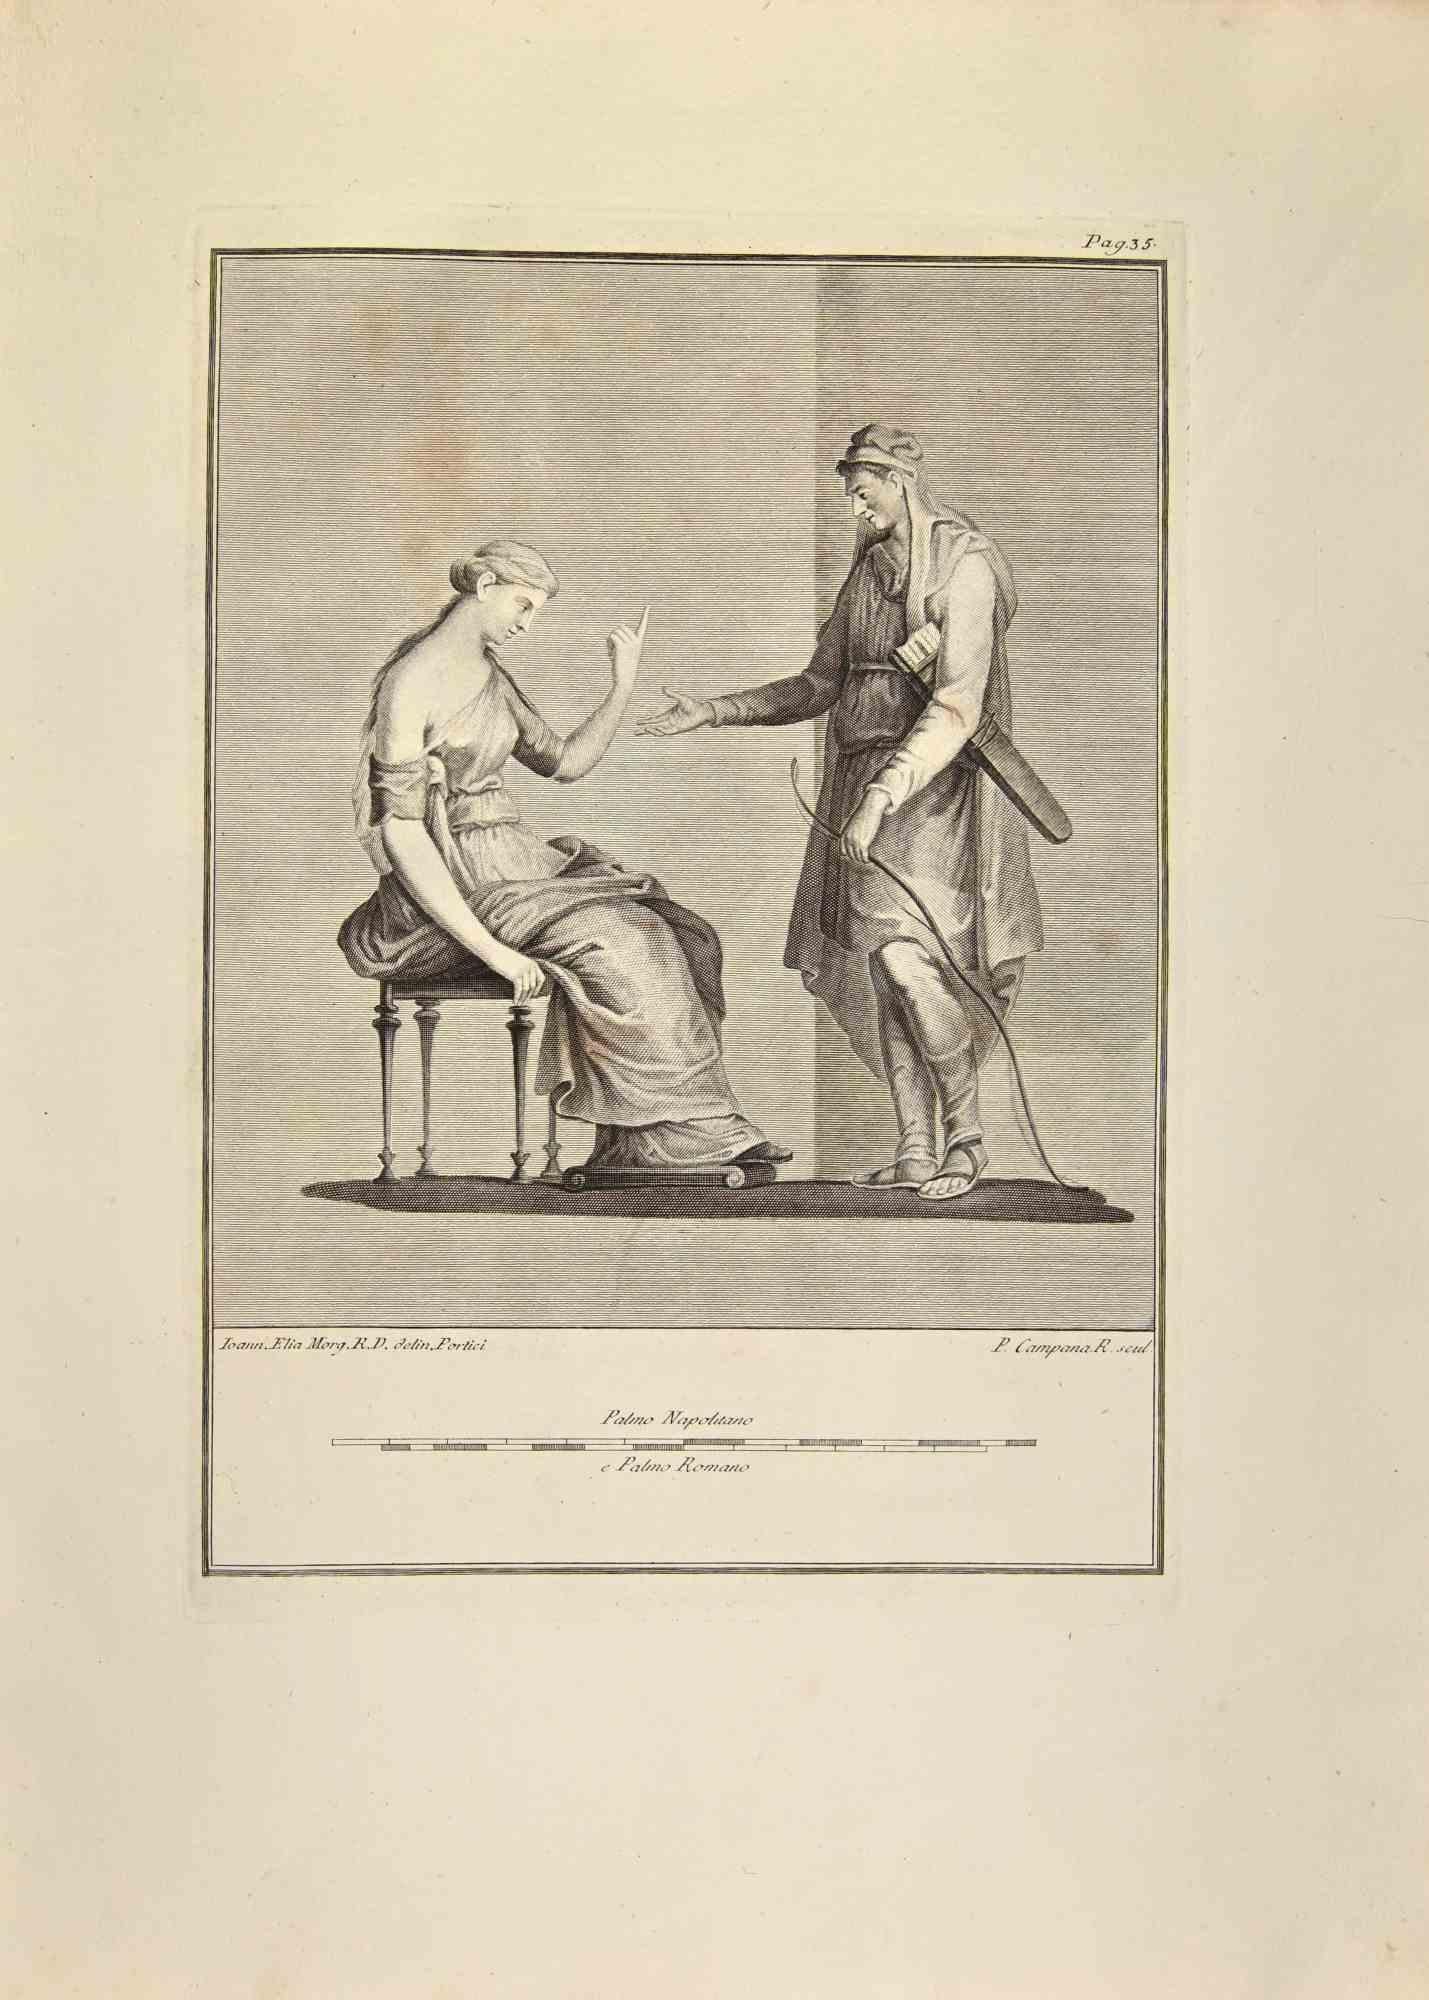 Lady and Archer from "Antiquities of Herculaneum" is an etching on paper realized by Ferdinando Campana in the 18th Century.

Signed on the plate.

Good conditions with folding, due to the time.

The etching belongs to the print suite “Antiquities